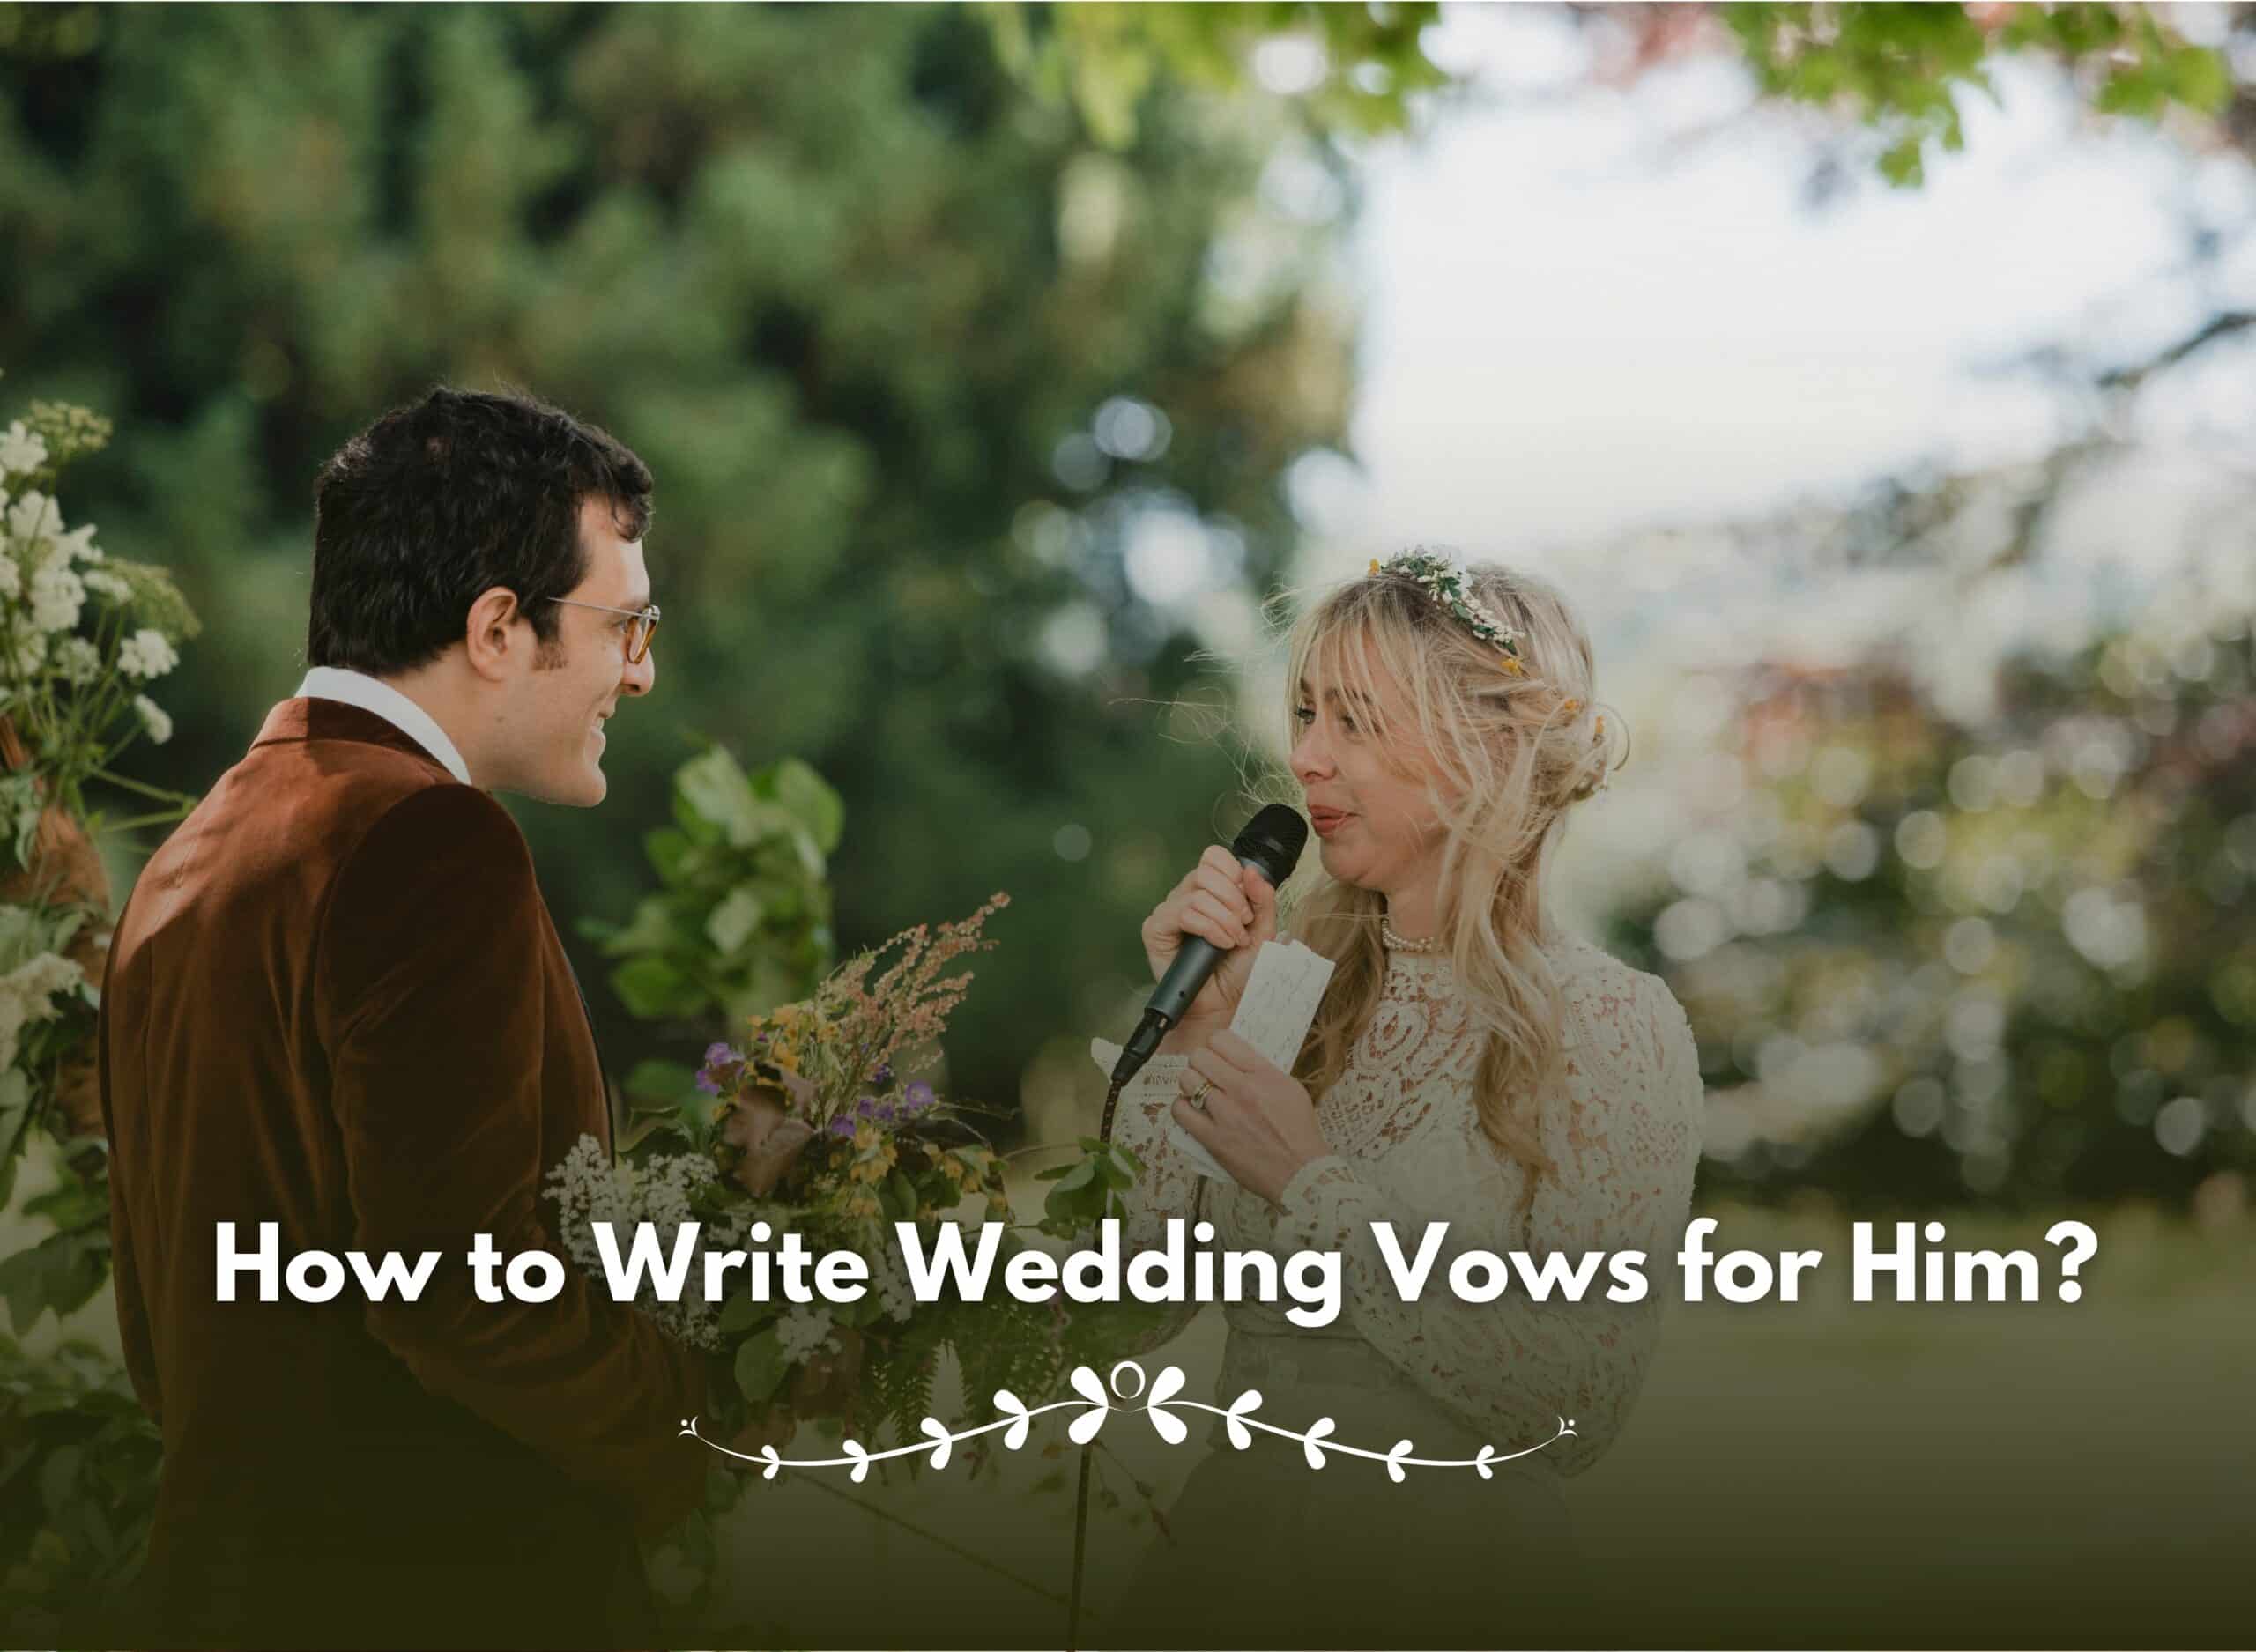 How To Write Wedding Vows For Him Crafting Your Perfect Promise Scaled - How To Write Wedding Vows For Him | Cubebik Blog